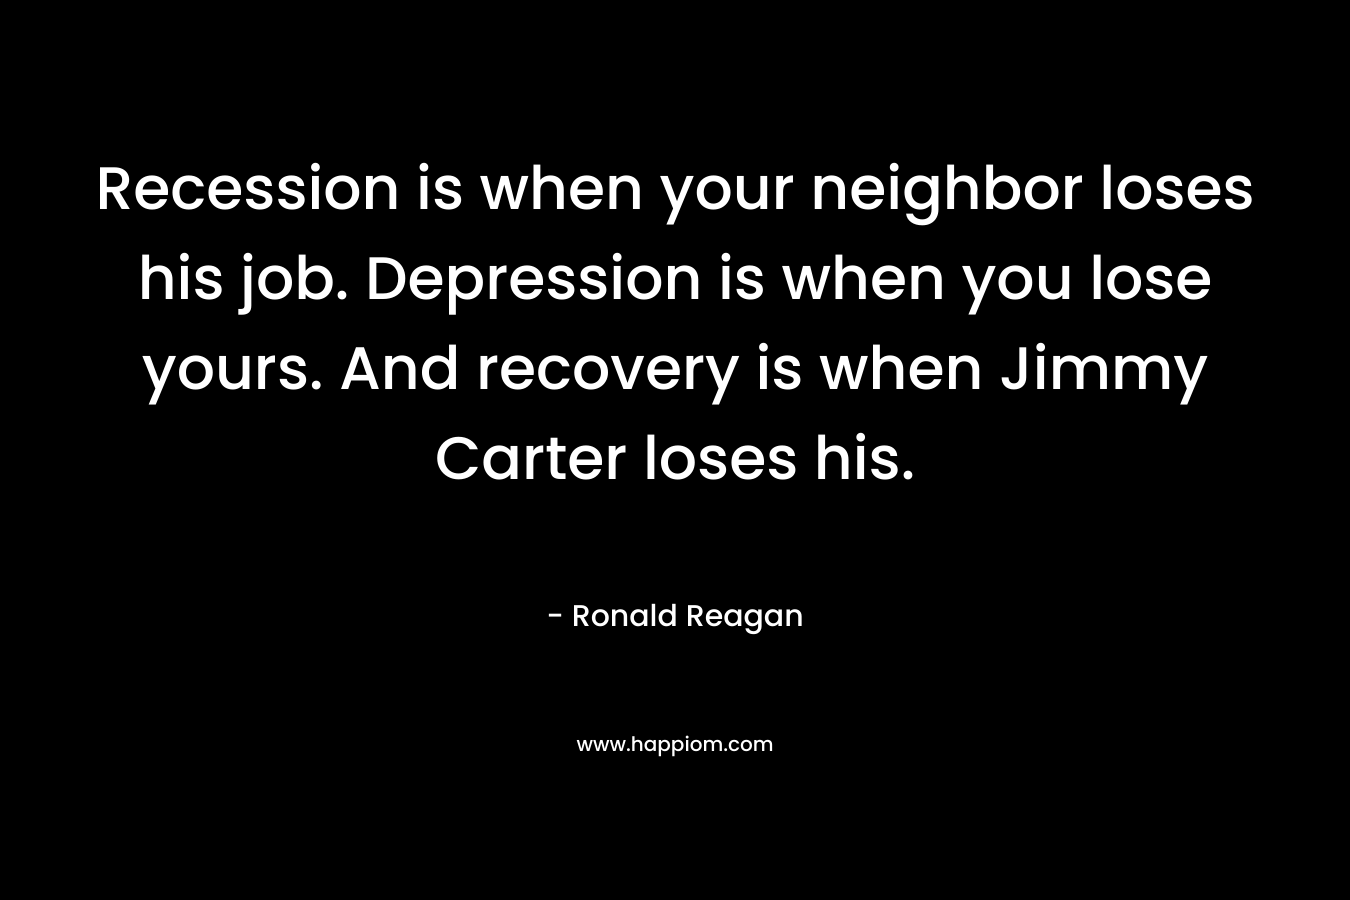 Recession is when your neighbor loses his job. Depression is when you lose yours. And recovery is when Jimmy Carter loses his.